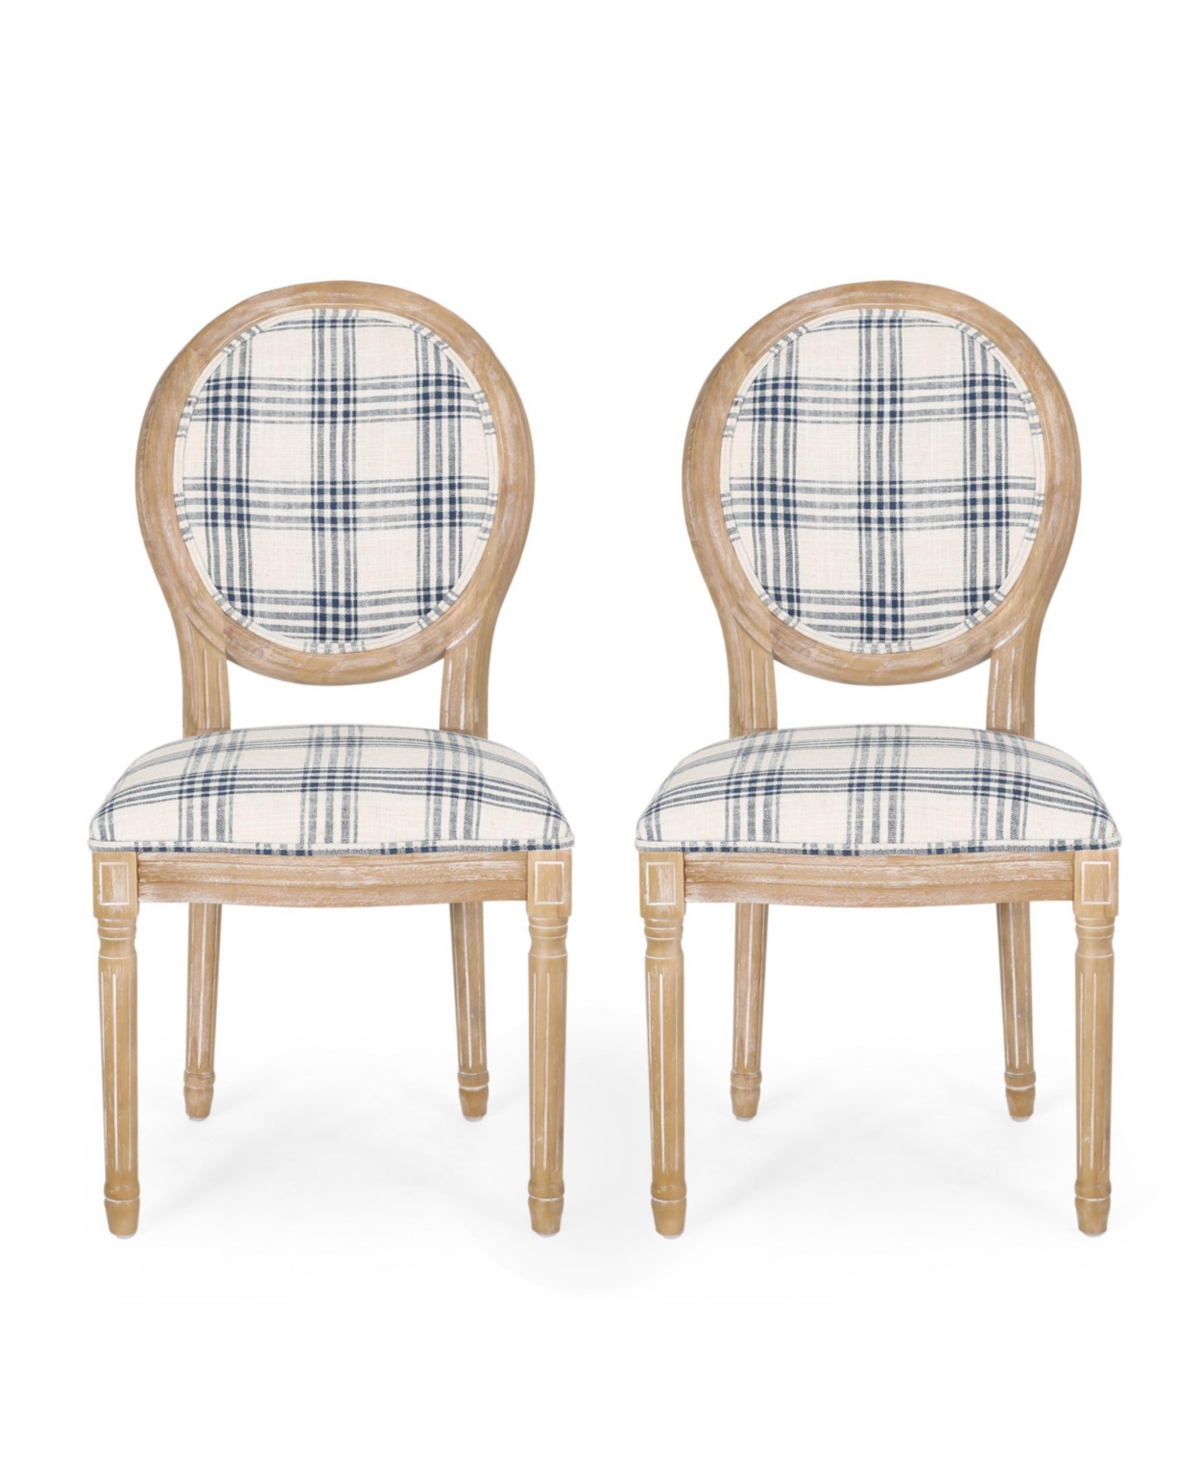 Noble House Phinnaeus French Country Dining Chairs Set, 2 Piece In Dark Blue Plaid And Light Beige